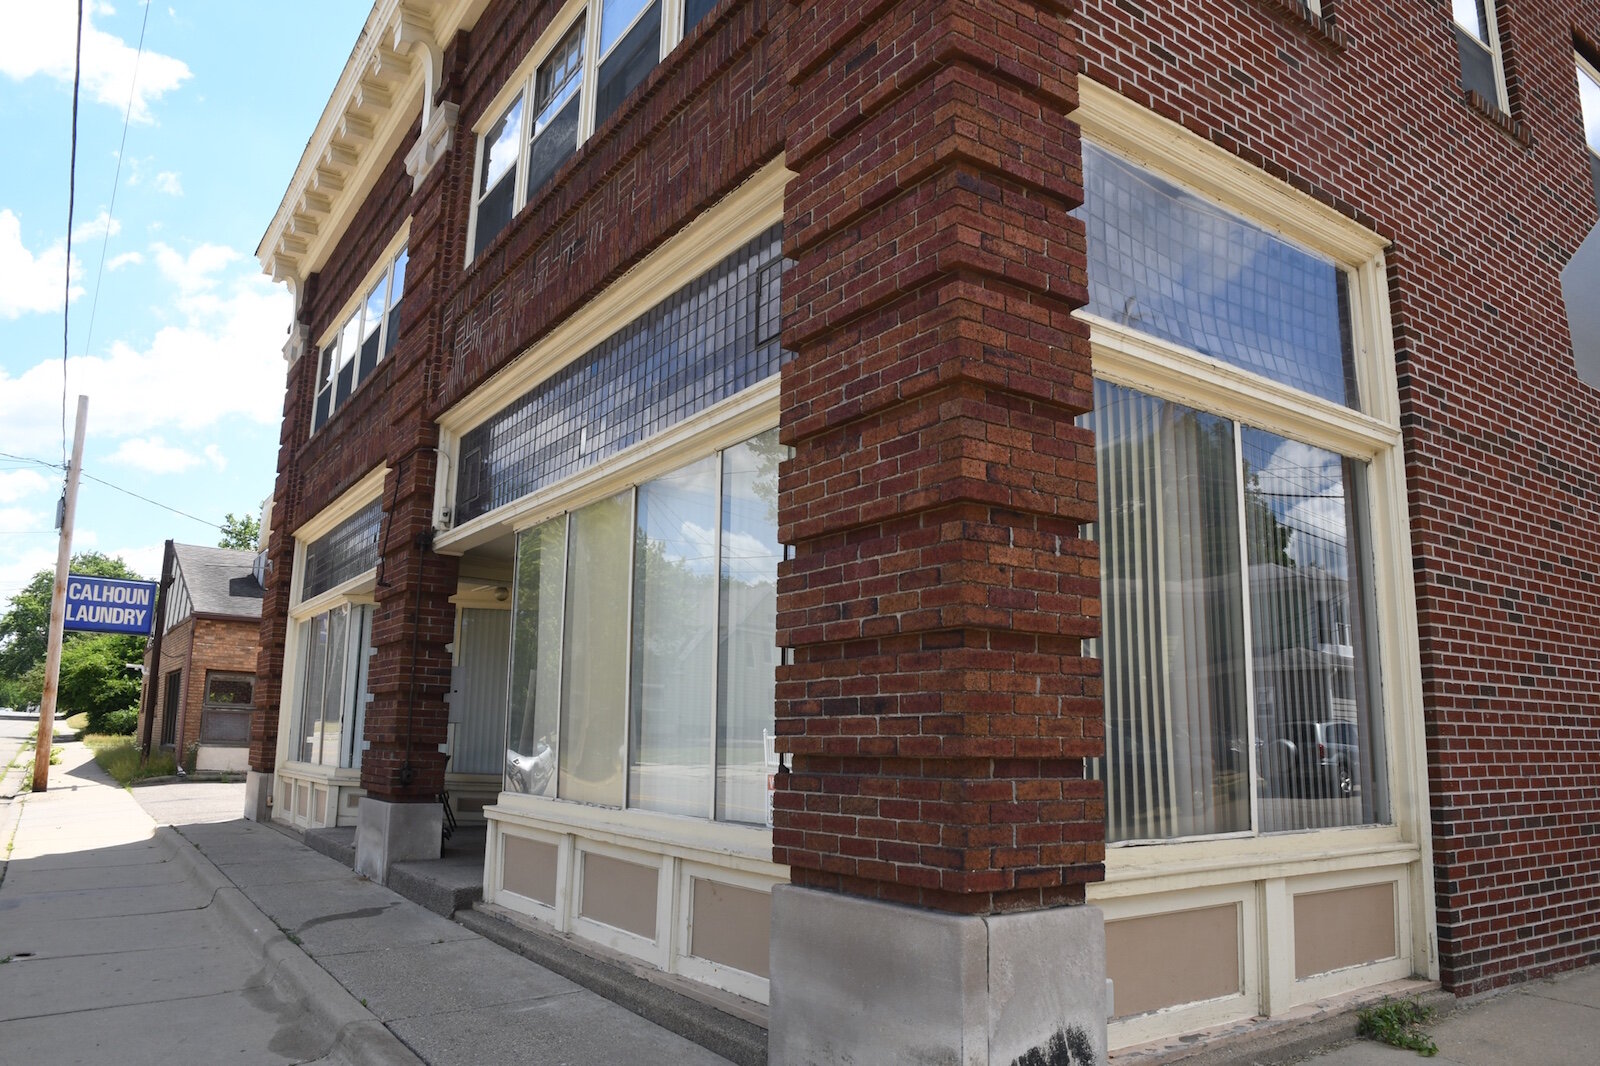 B.C. Pride has new headquarters will occupy the lower half of the two-story building at 104 Calhoun St.